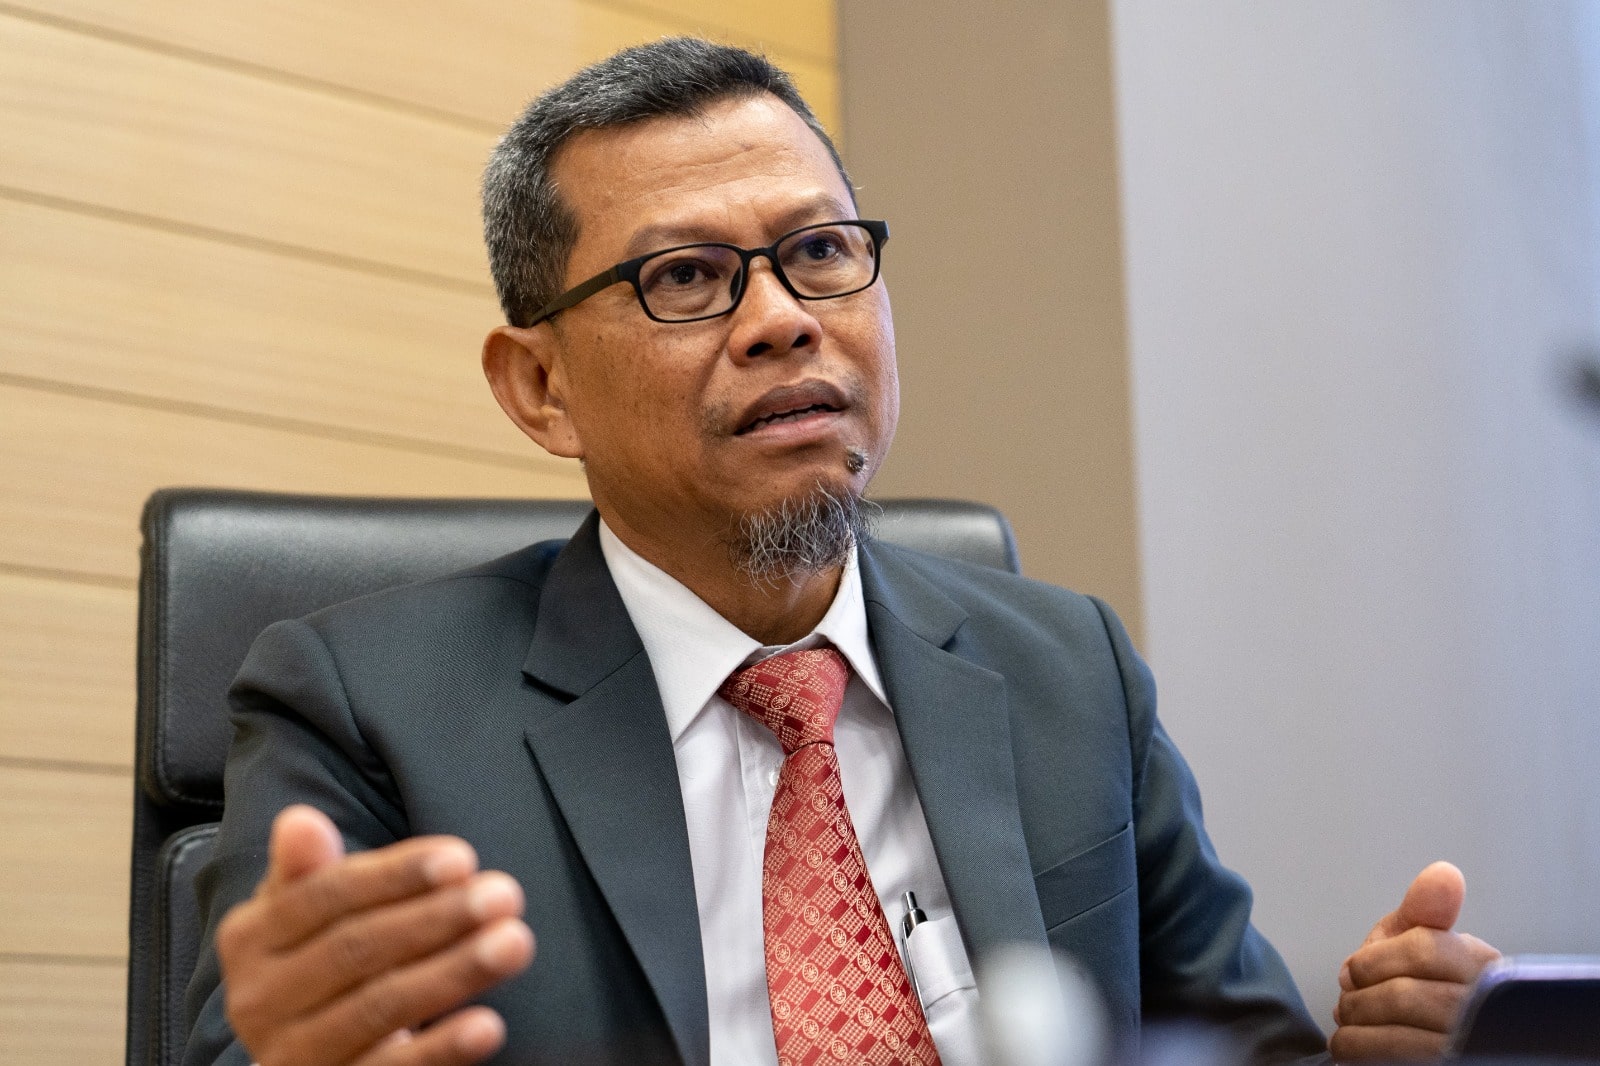 Mp For Kuala Langat: 'It'S Time For National Health Insurance'